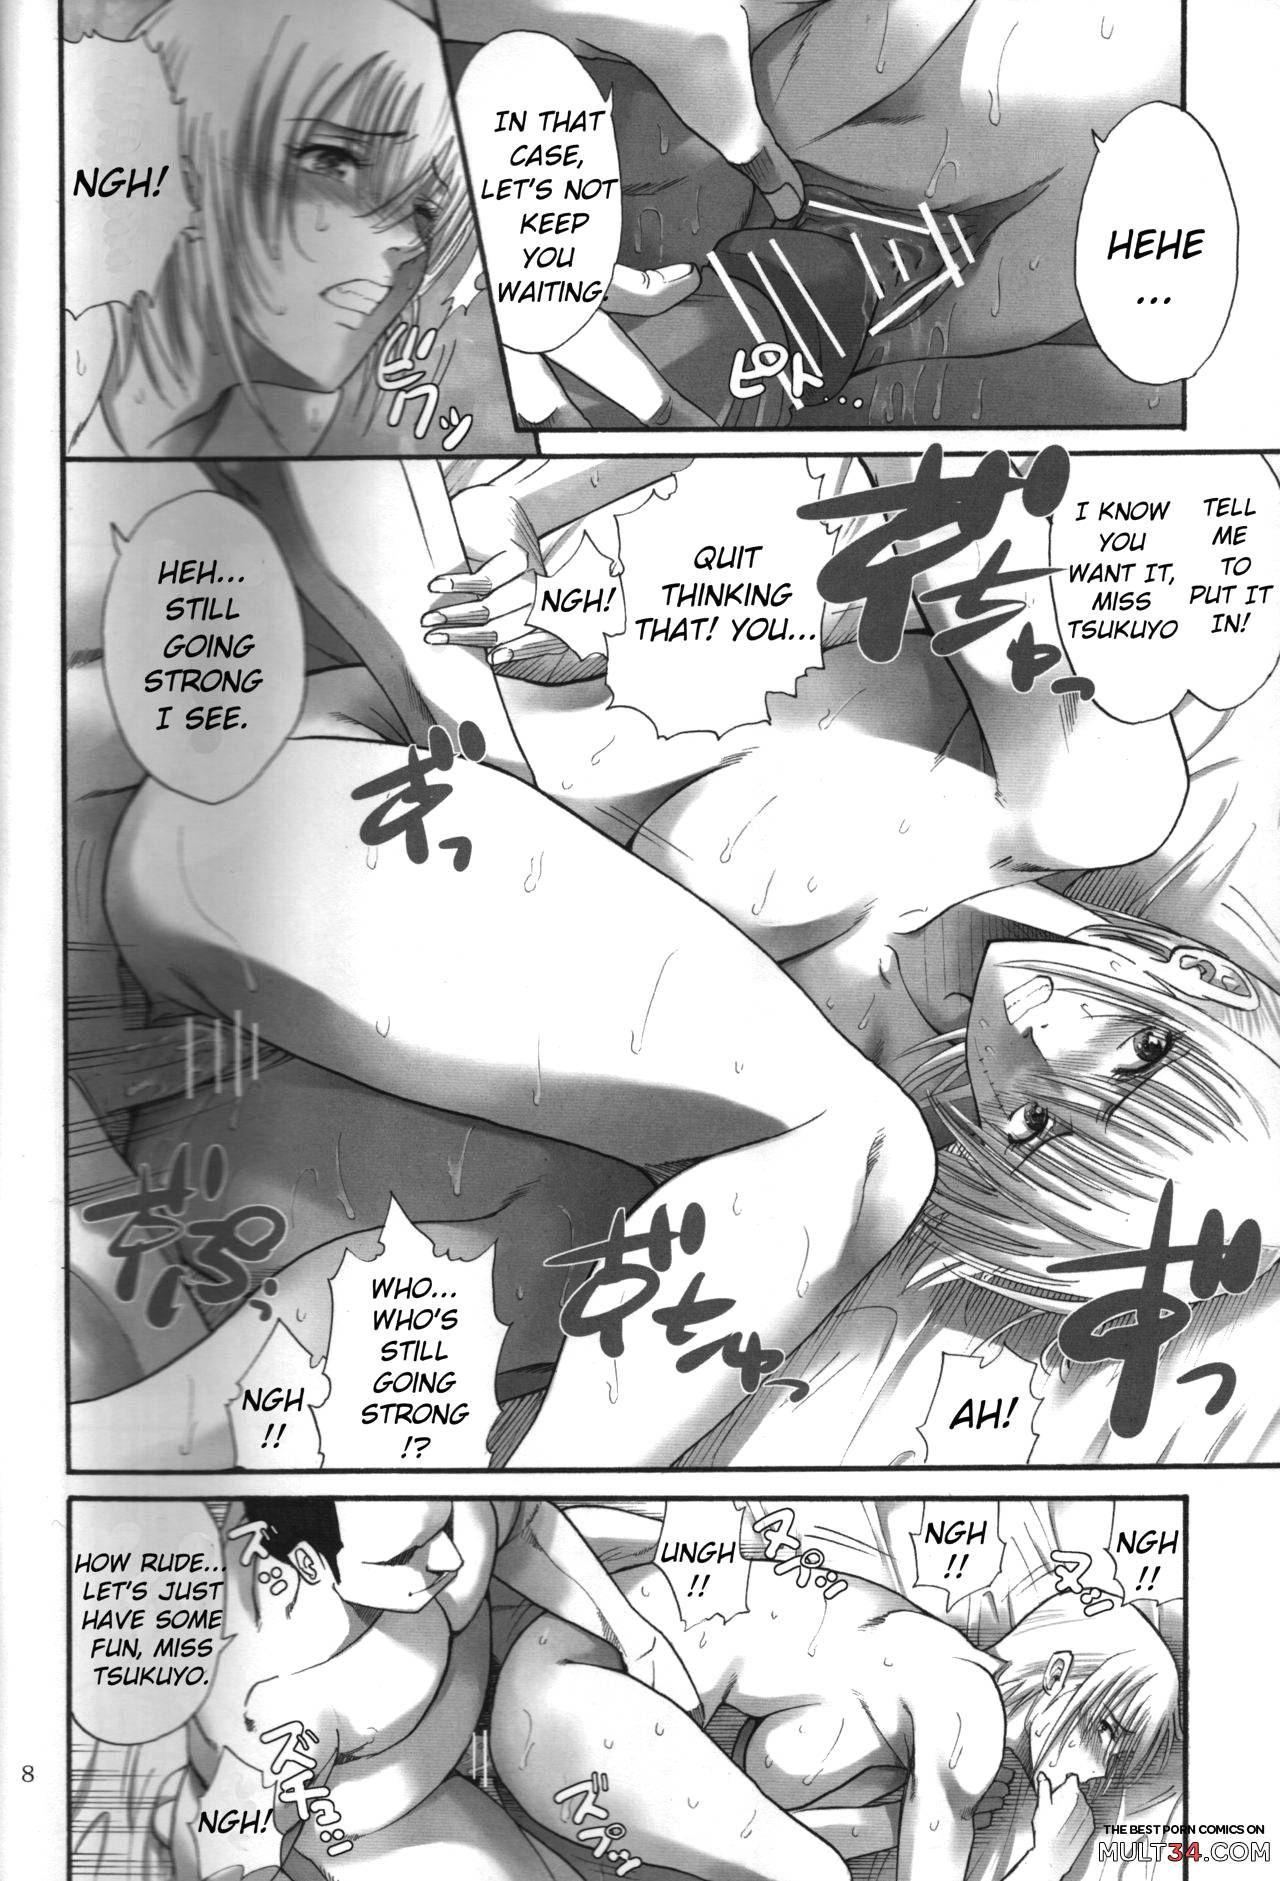 Tsukuyo you talking about nasty things 2 page 7